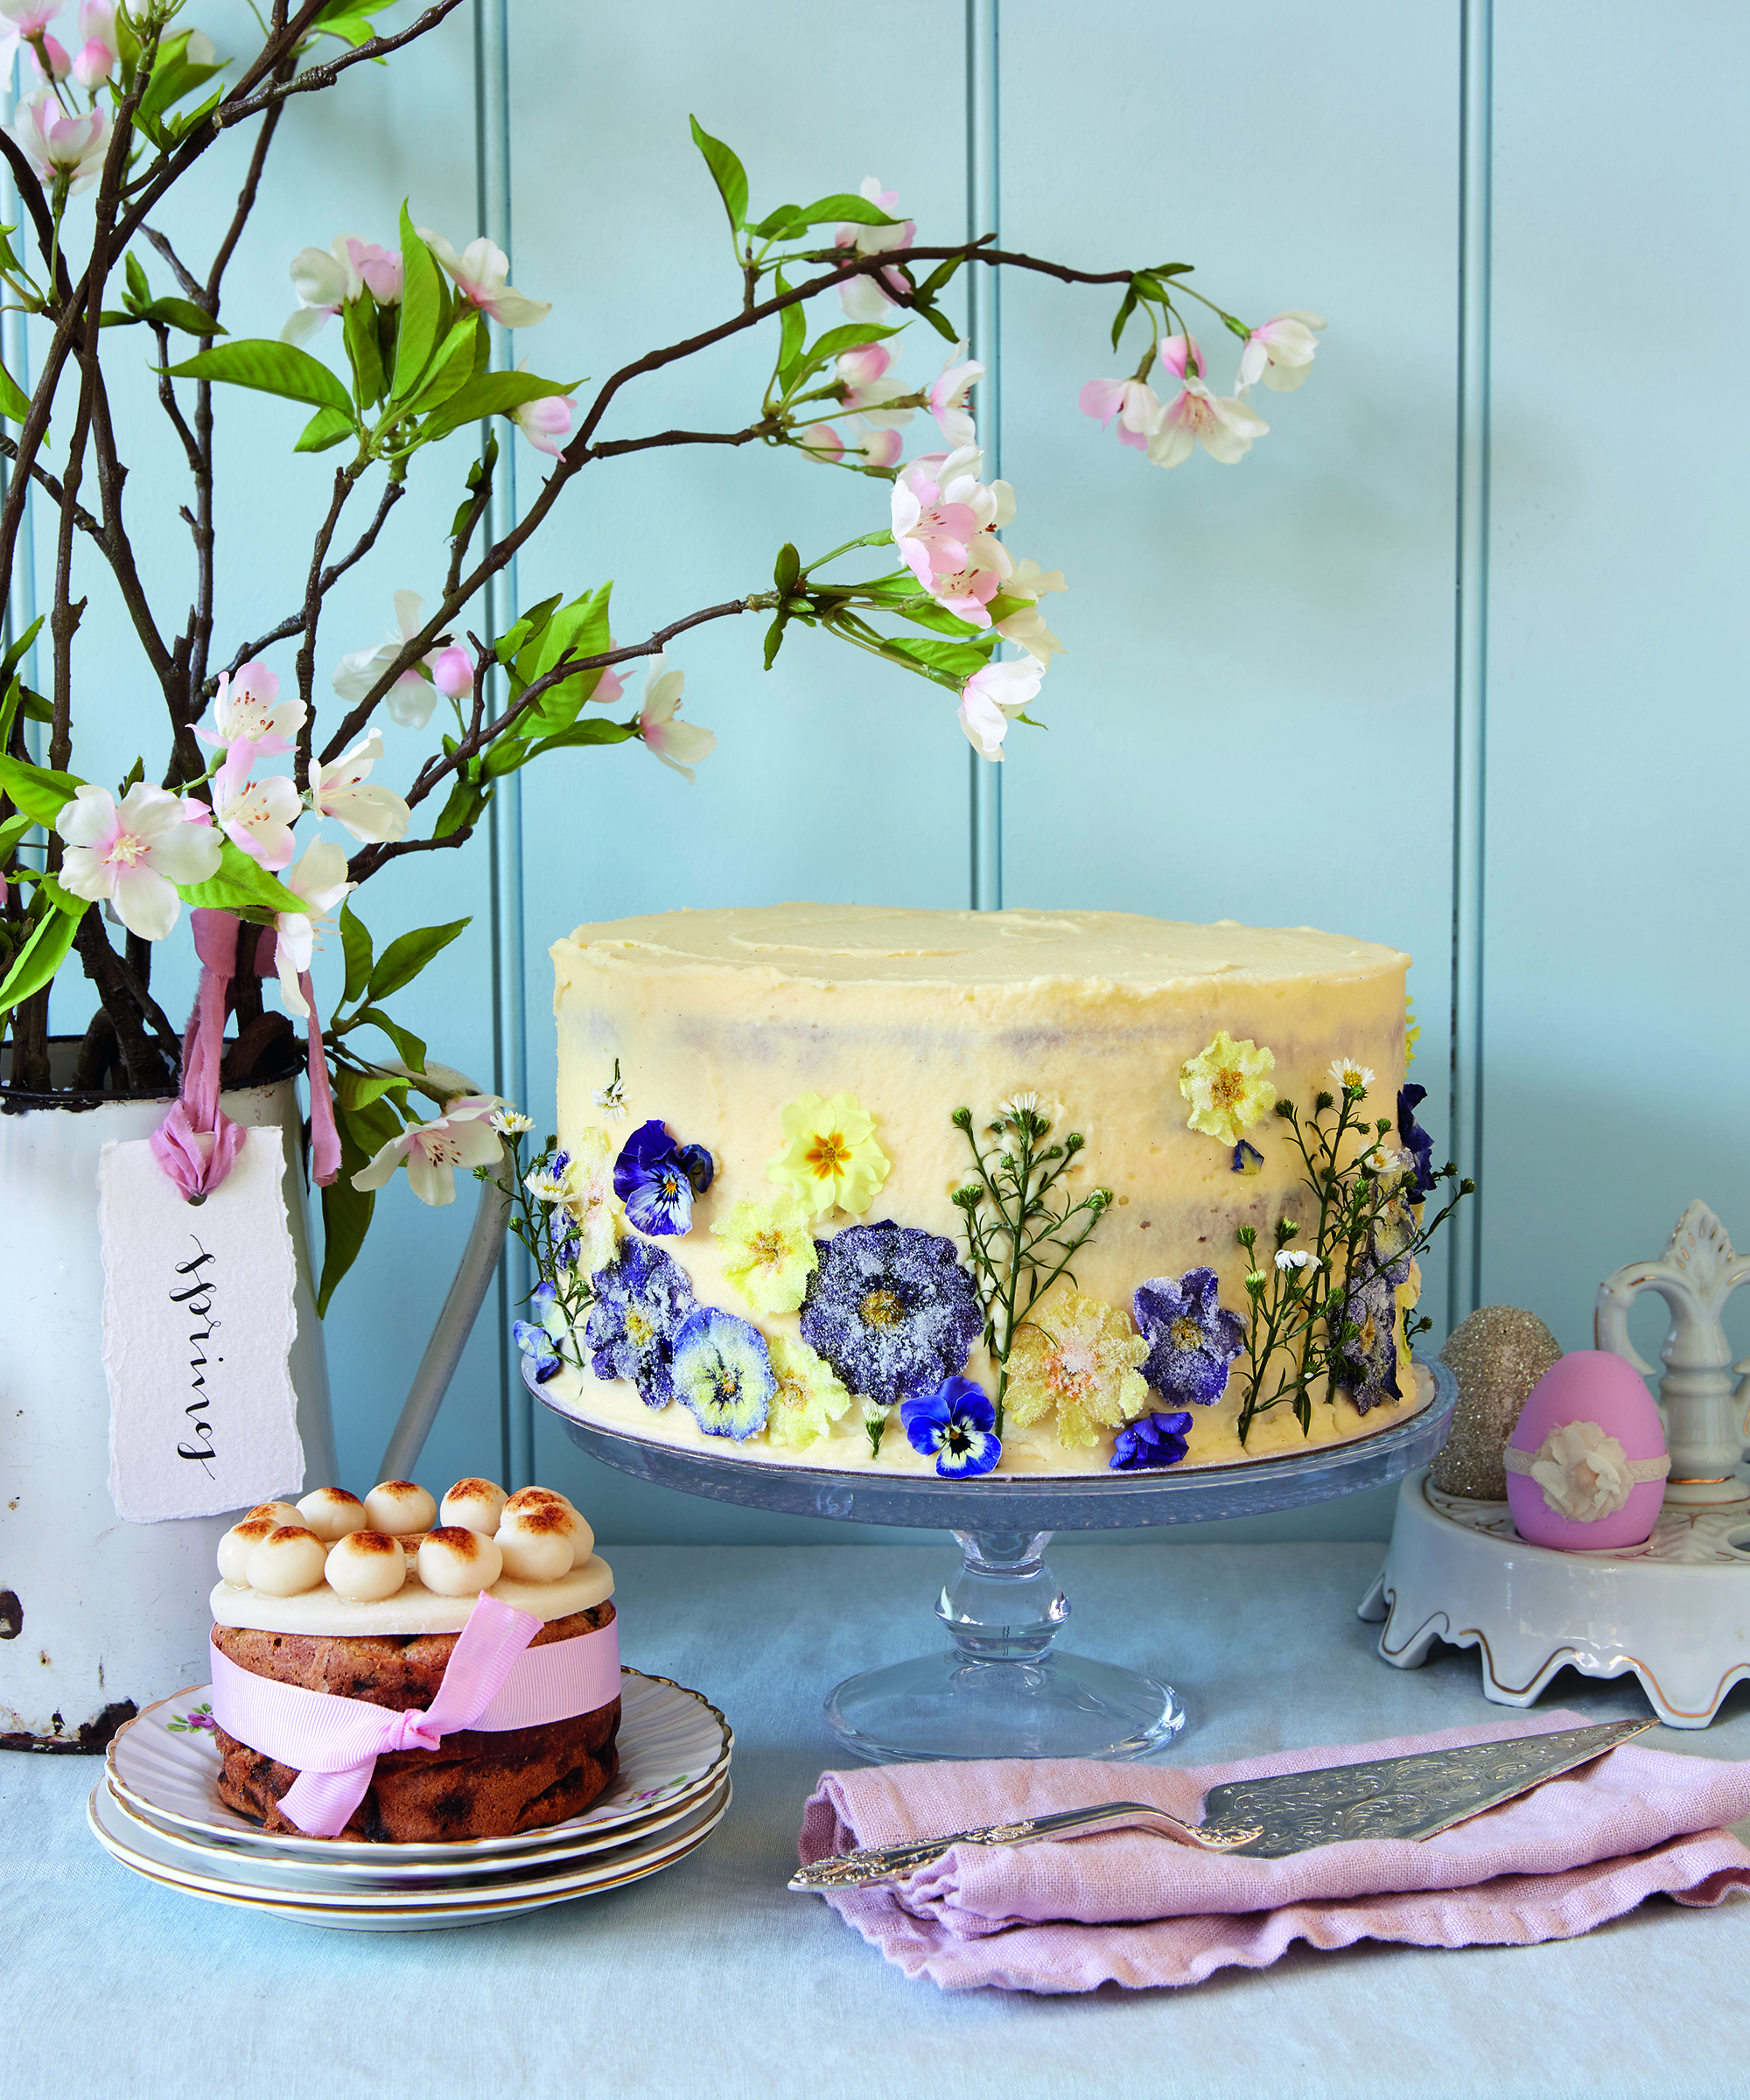 Easter cake decorated with edible flowers, and blossom stems in vintage jug